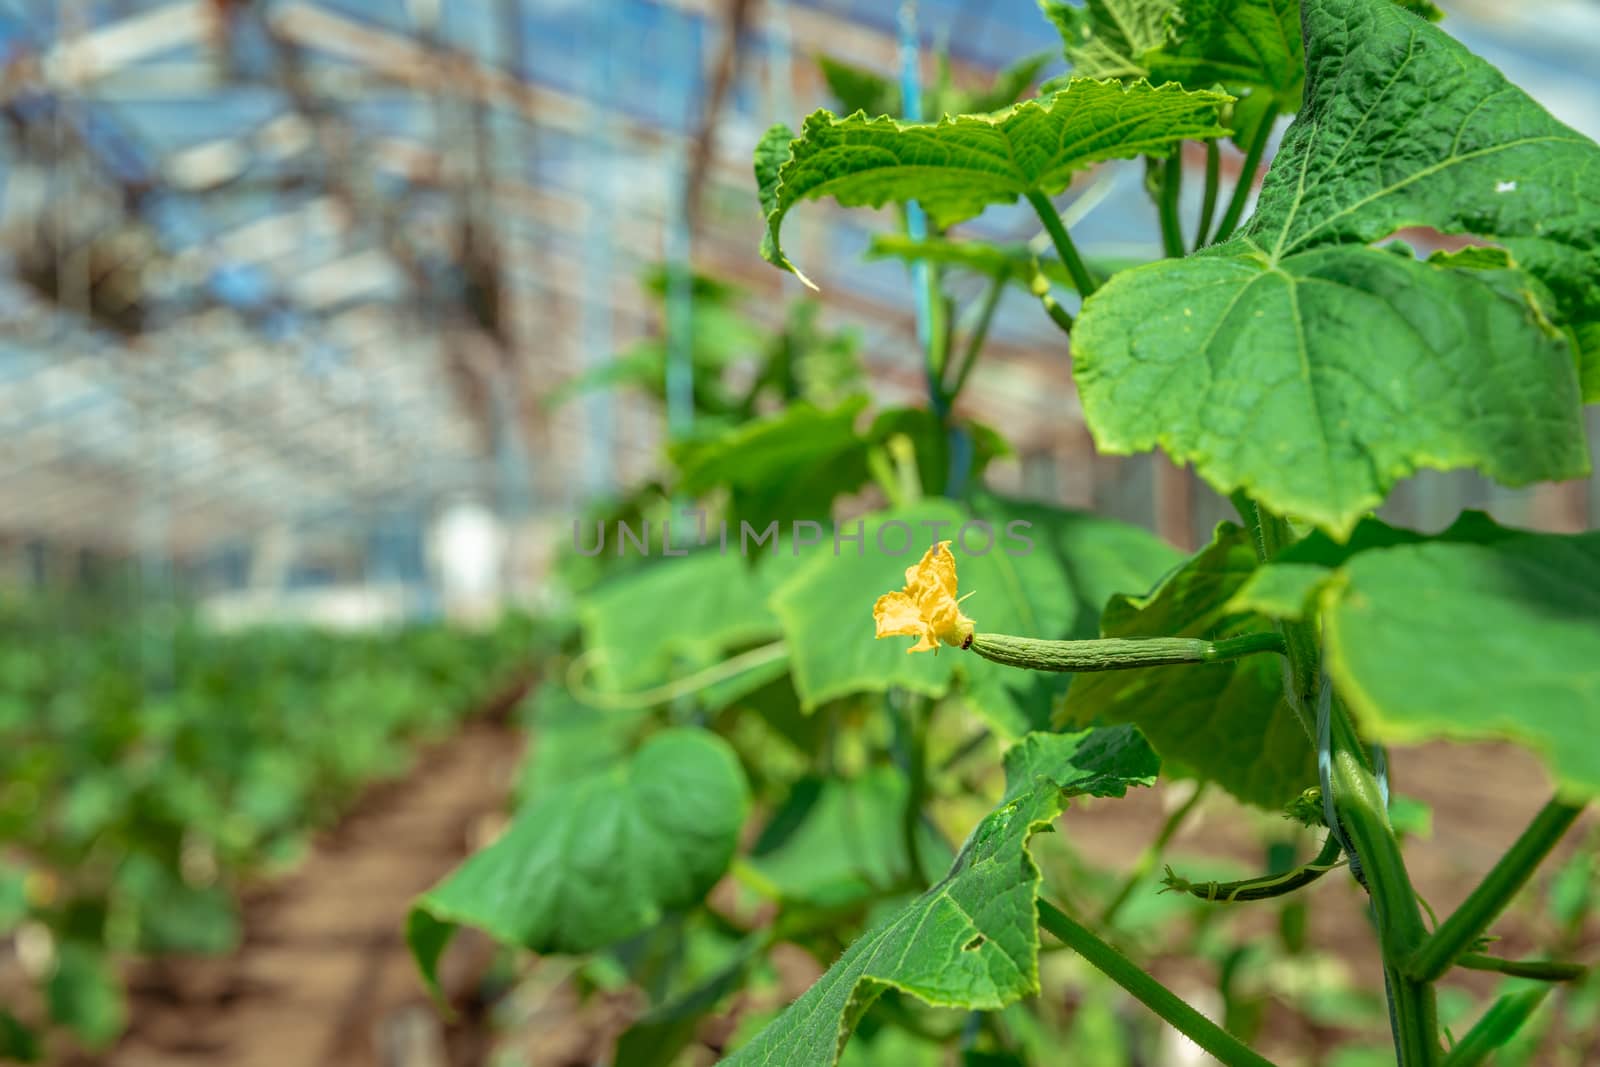 growing organic cucumbers without chemicals and pesticides in a greenhouse on the farm, healthy vegetables with vitamins.